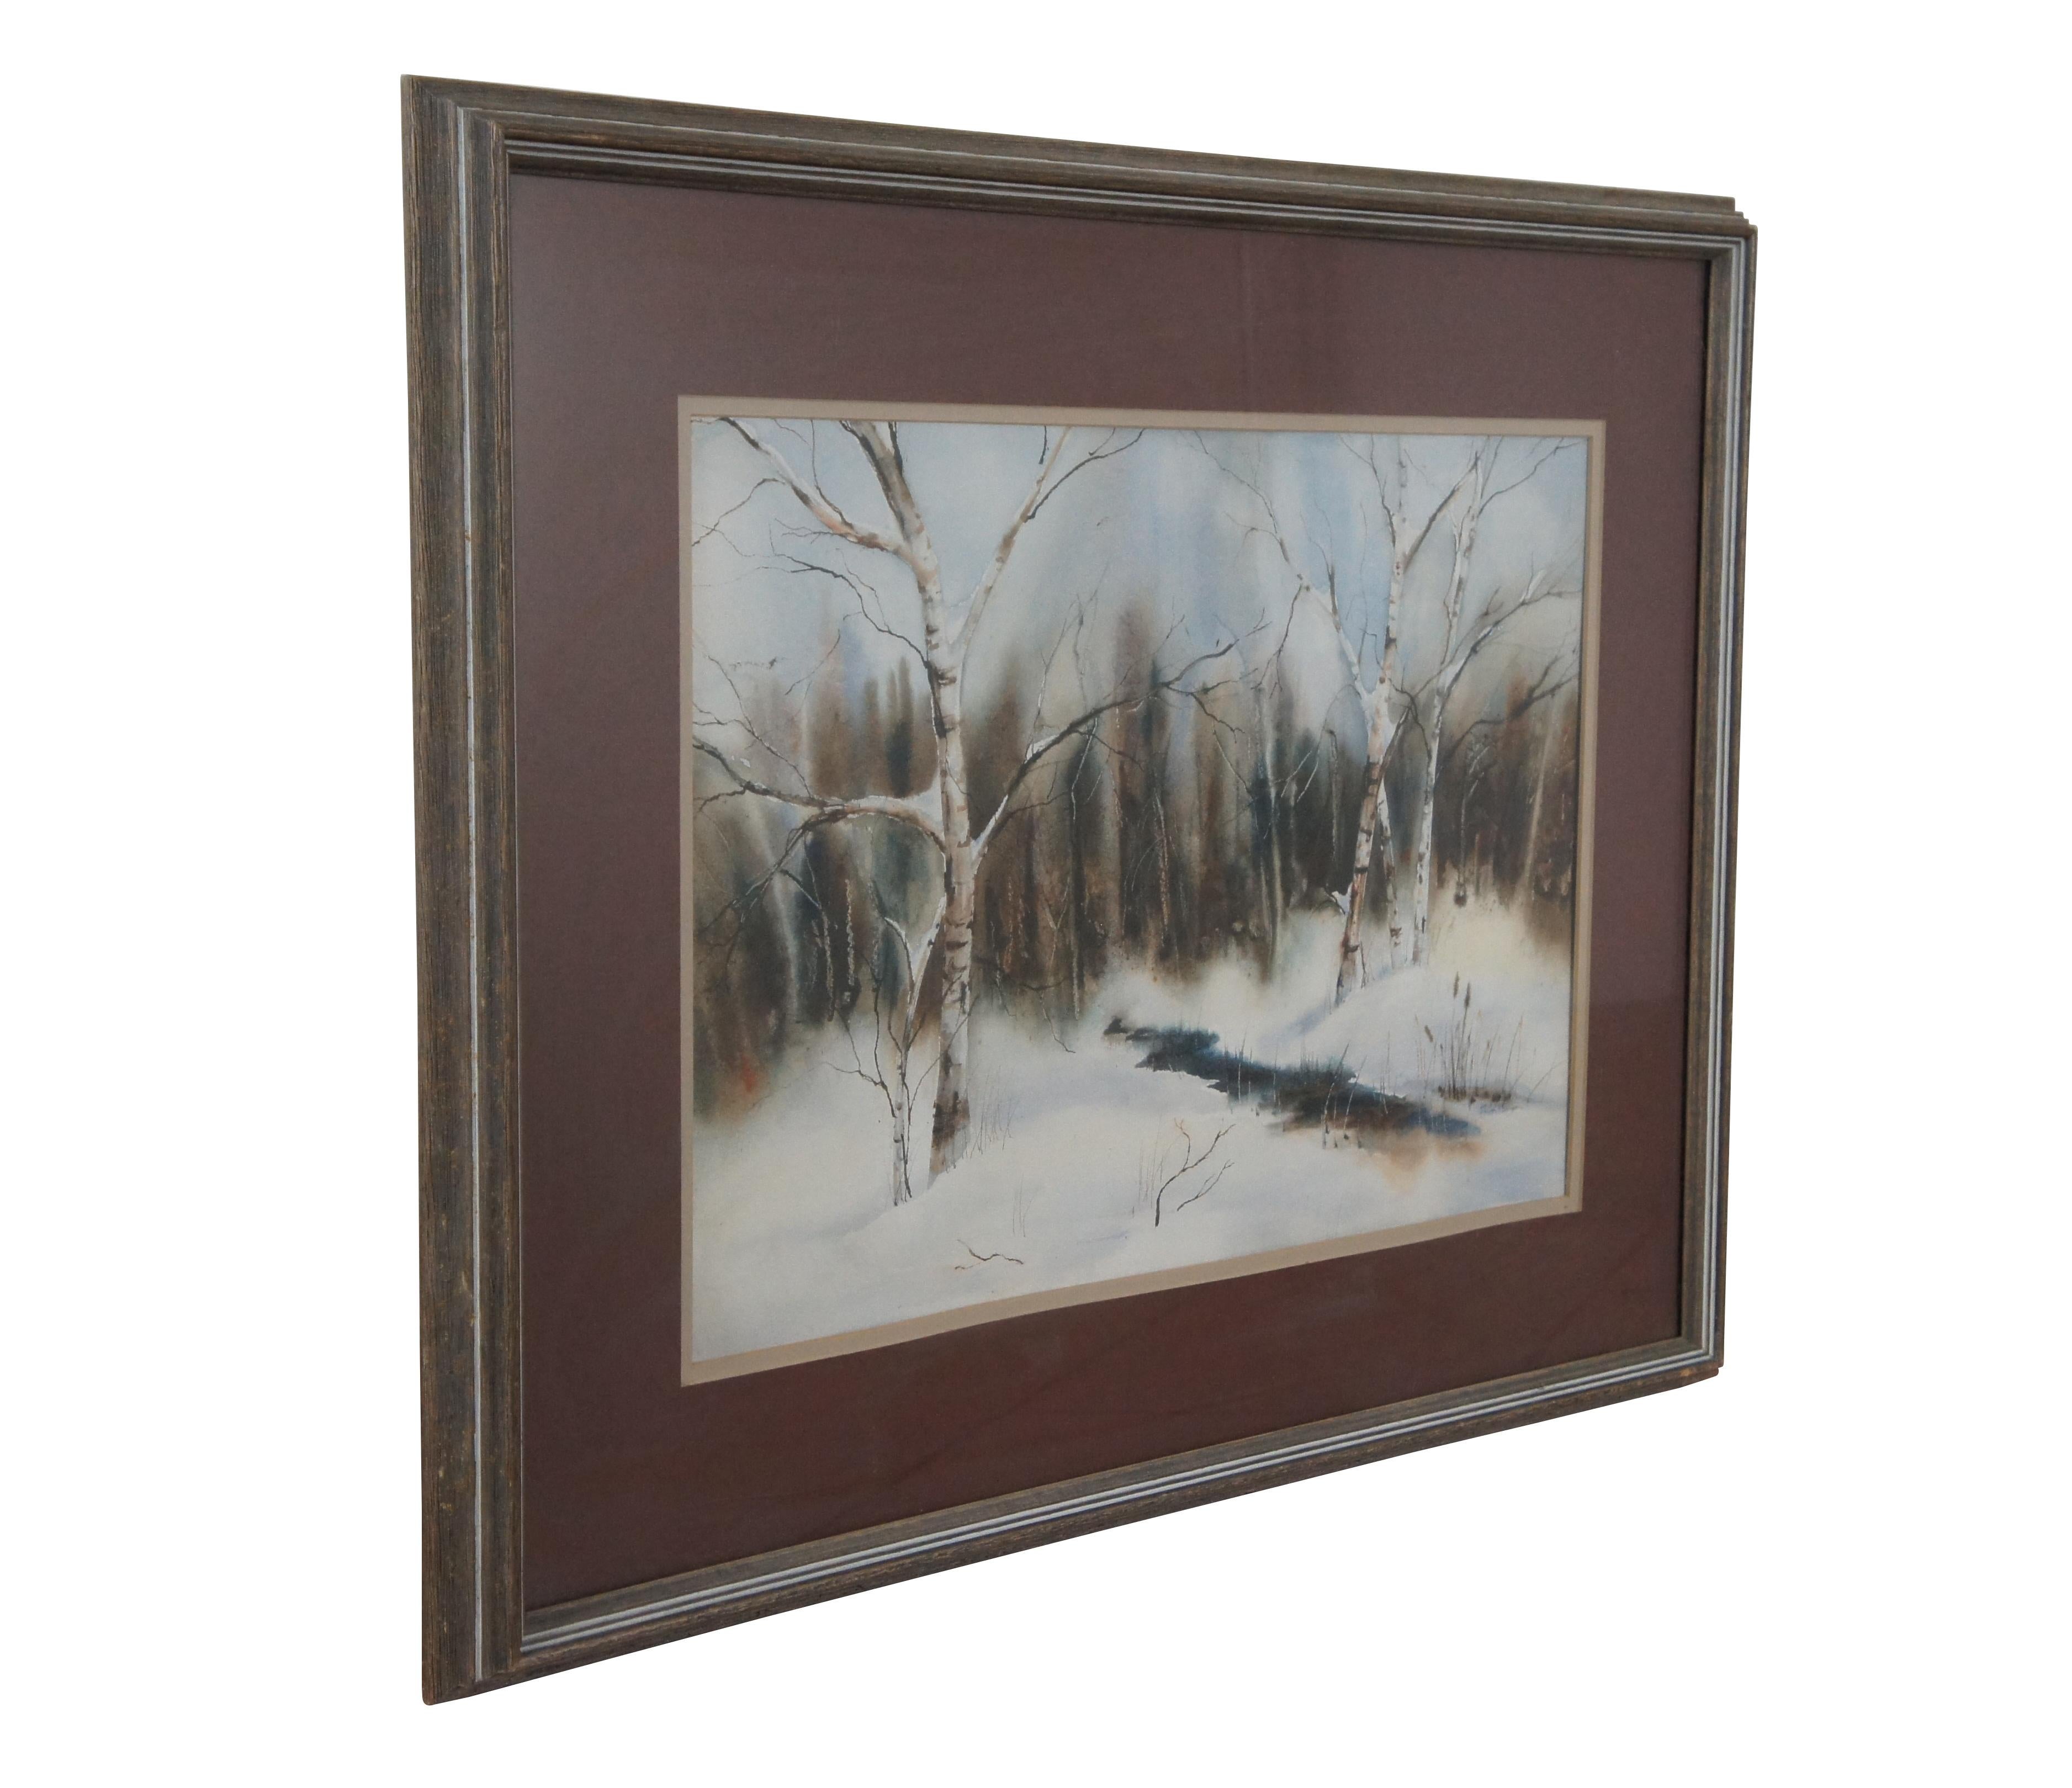 1975 Vintage Watercolor Landscape Painting December Morning by Sean Toomey 27